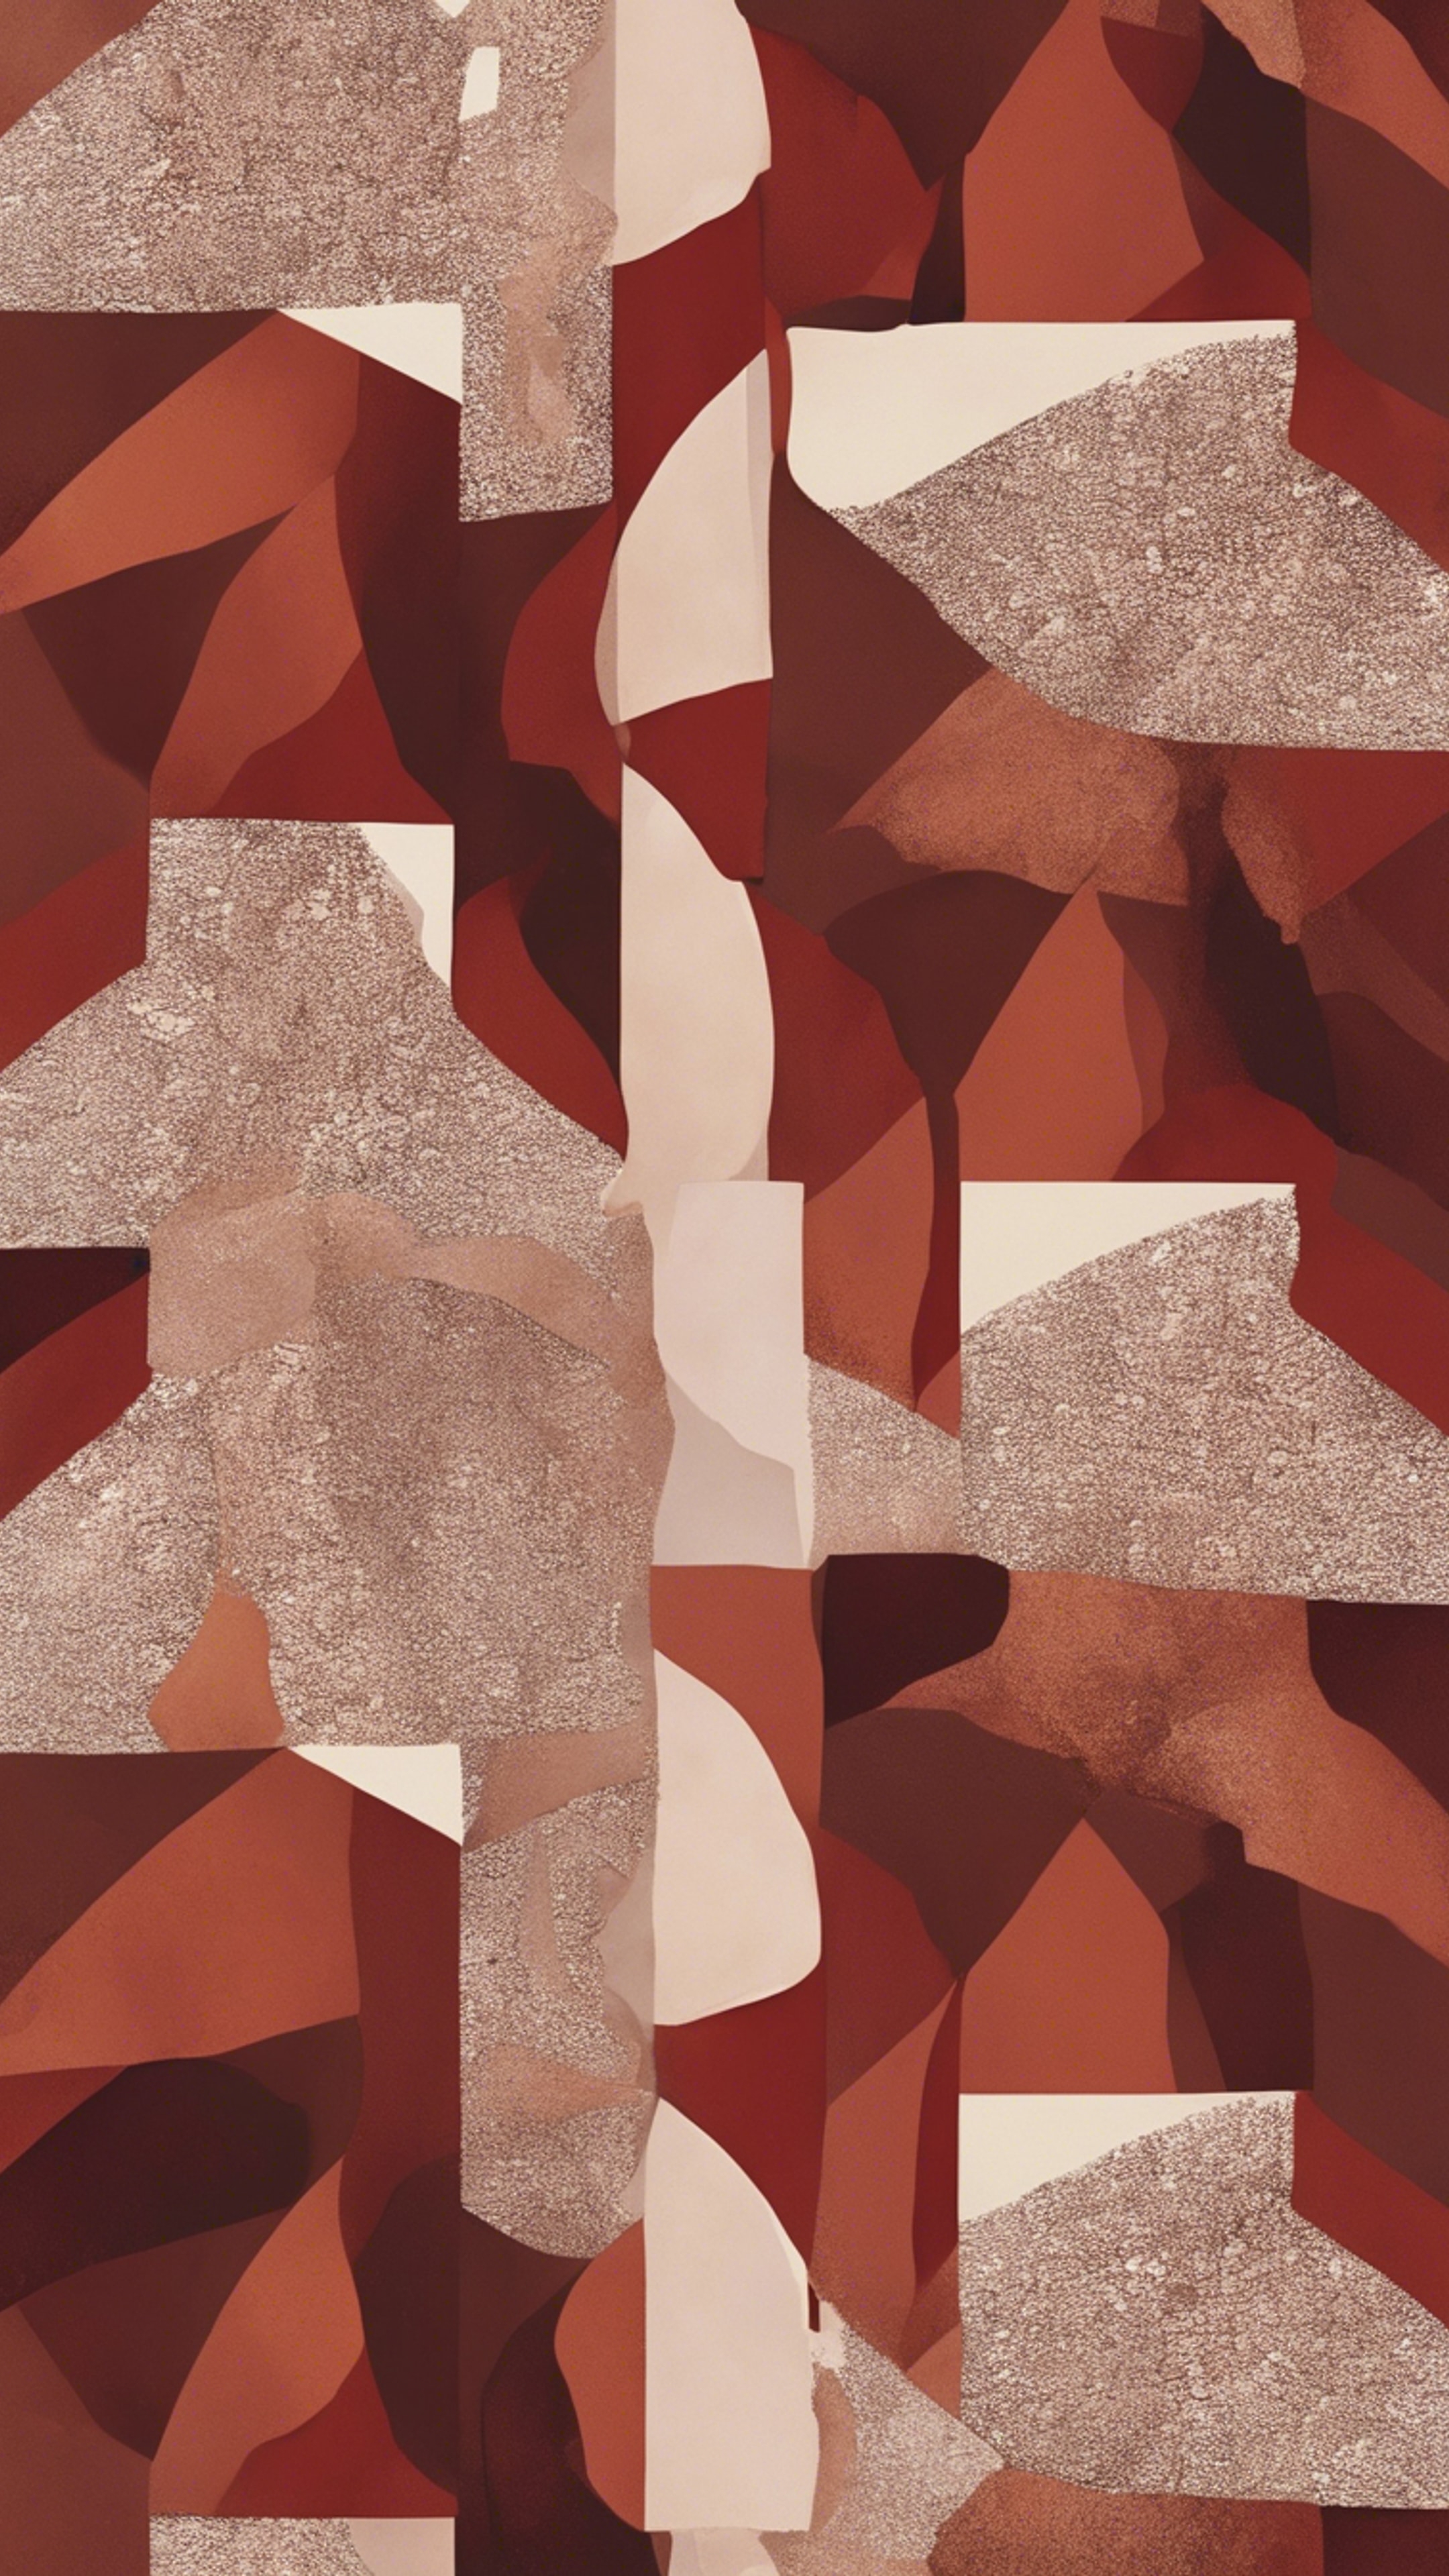 Irregular shapes in rich red and earthy brown hues, artfully scattered to form a unique abstract pattern.壁紙[9609e37b054b4aa6bf8e]